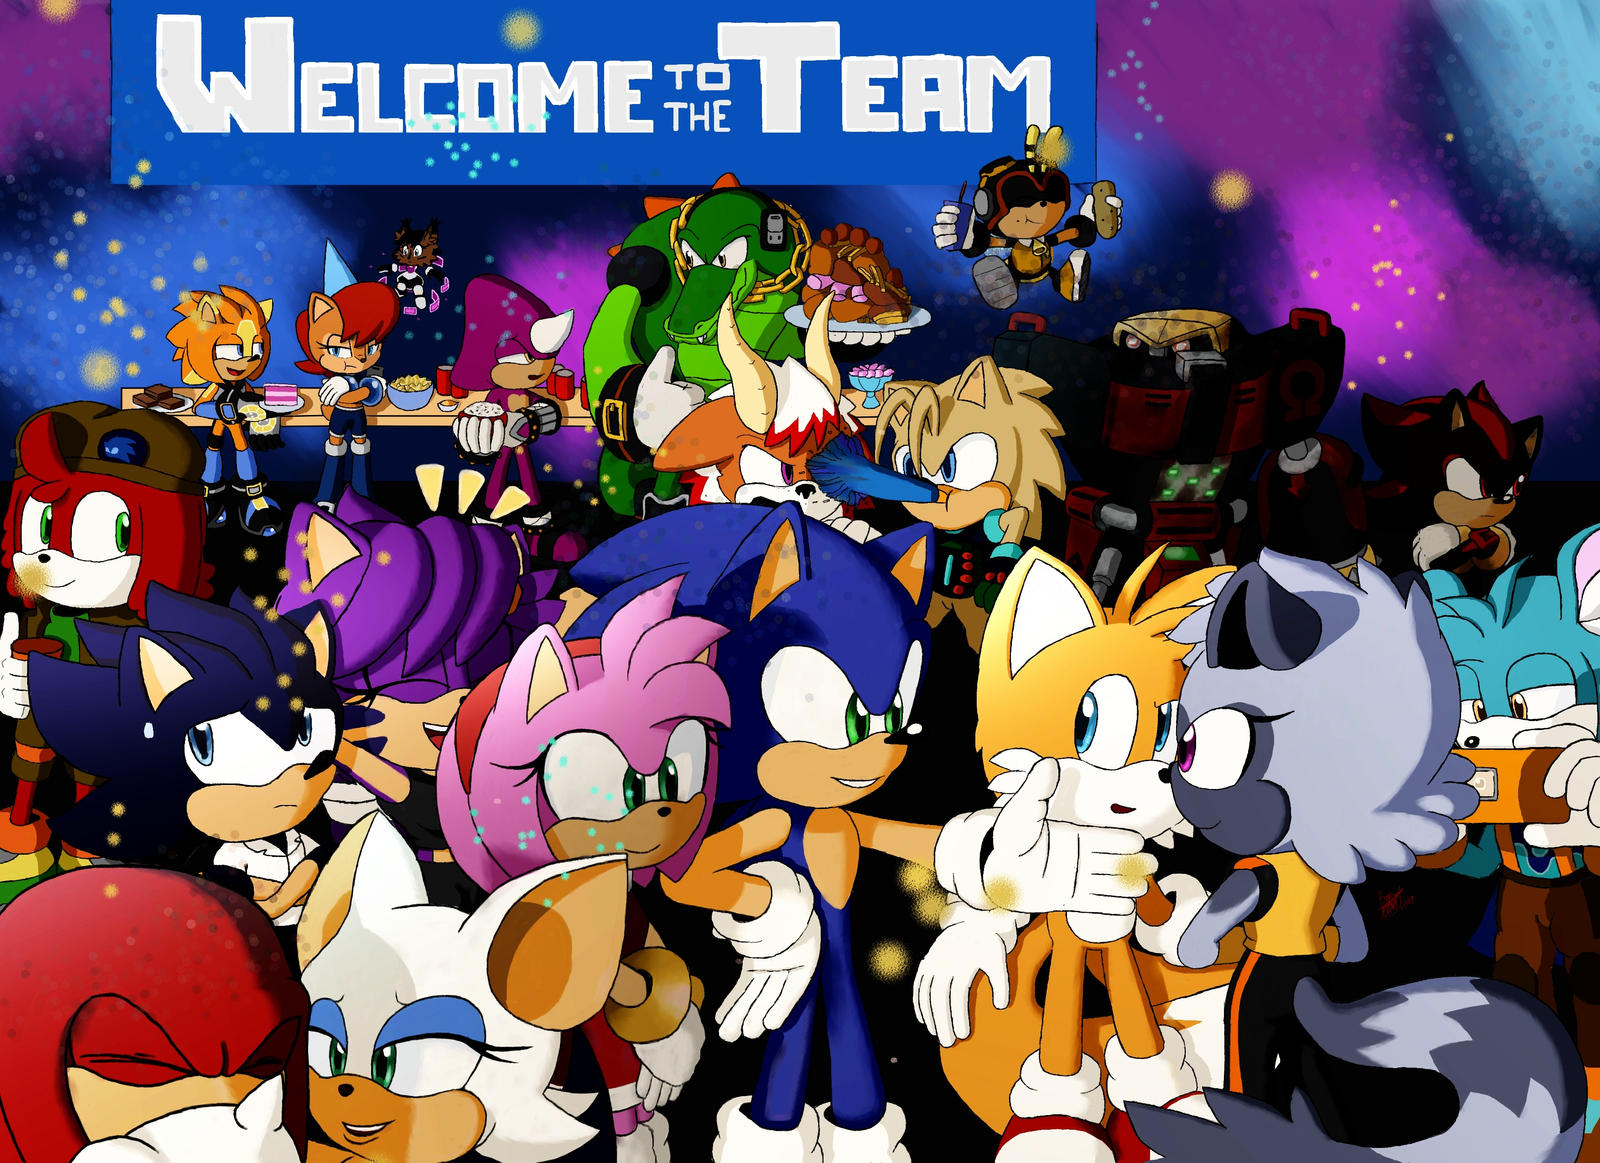 welcome-to-the-team-by-boreasth-on-deviantart